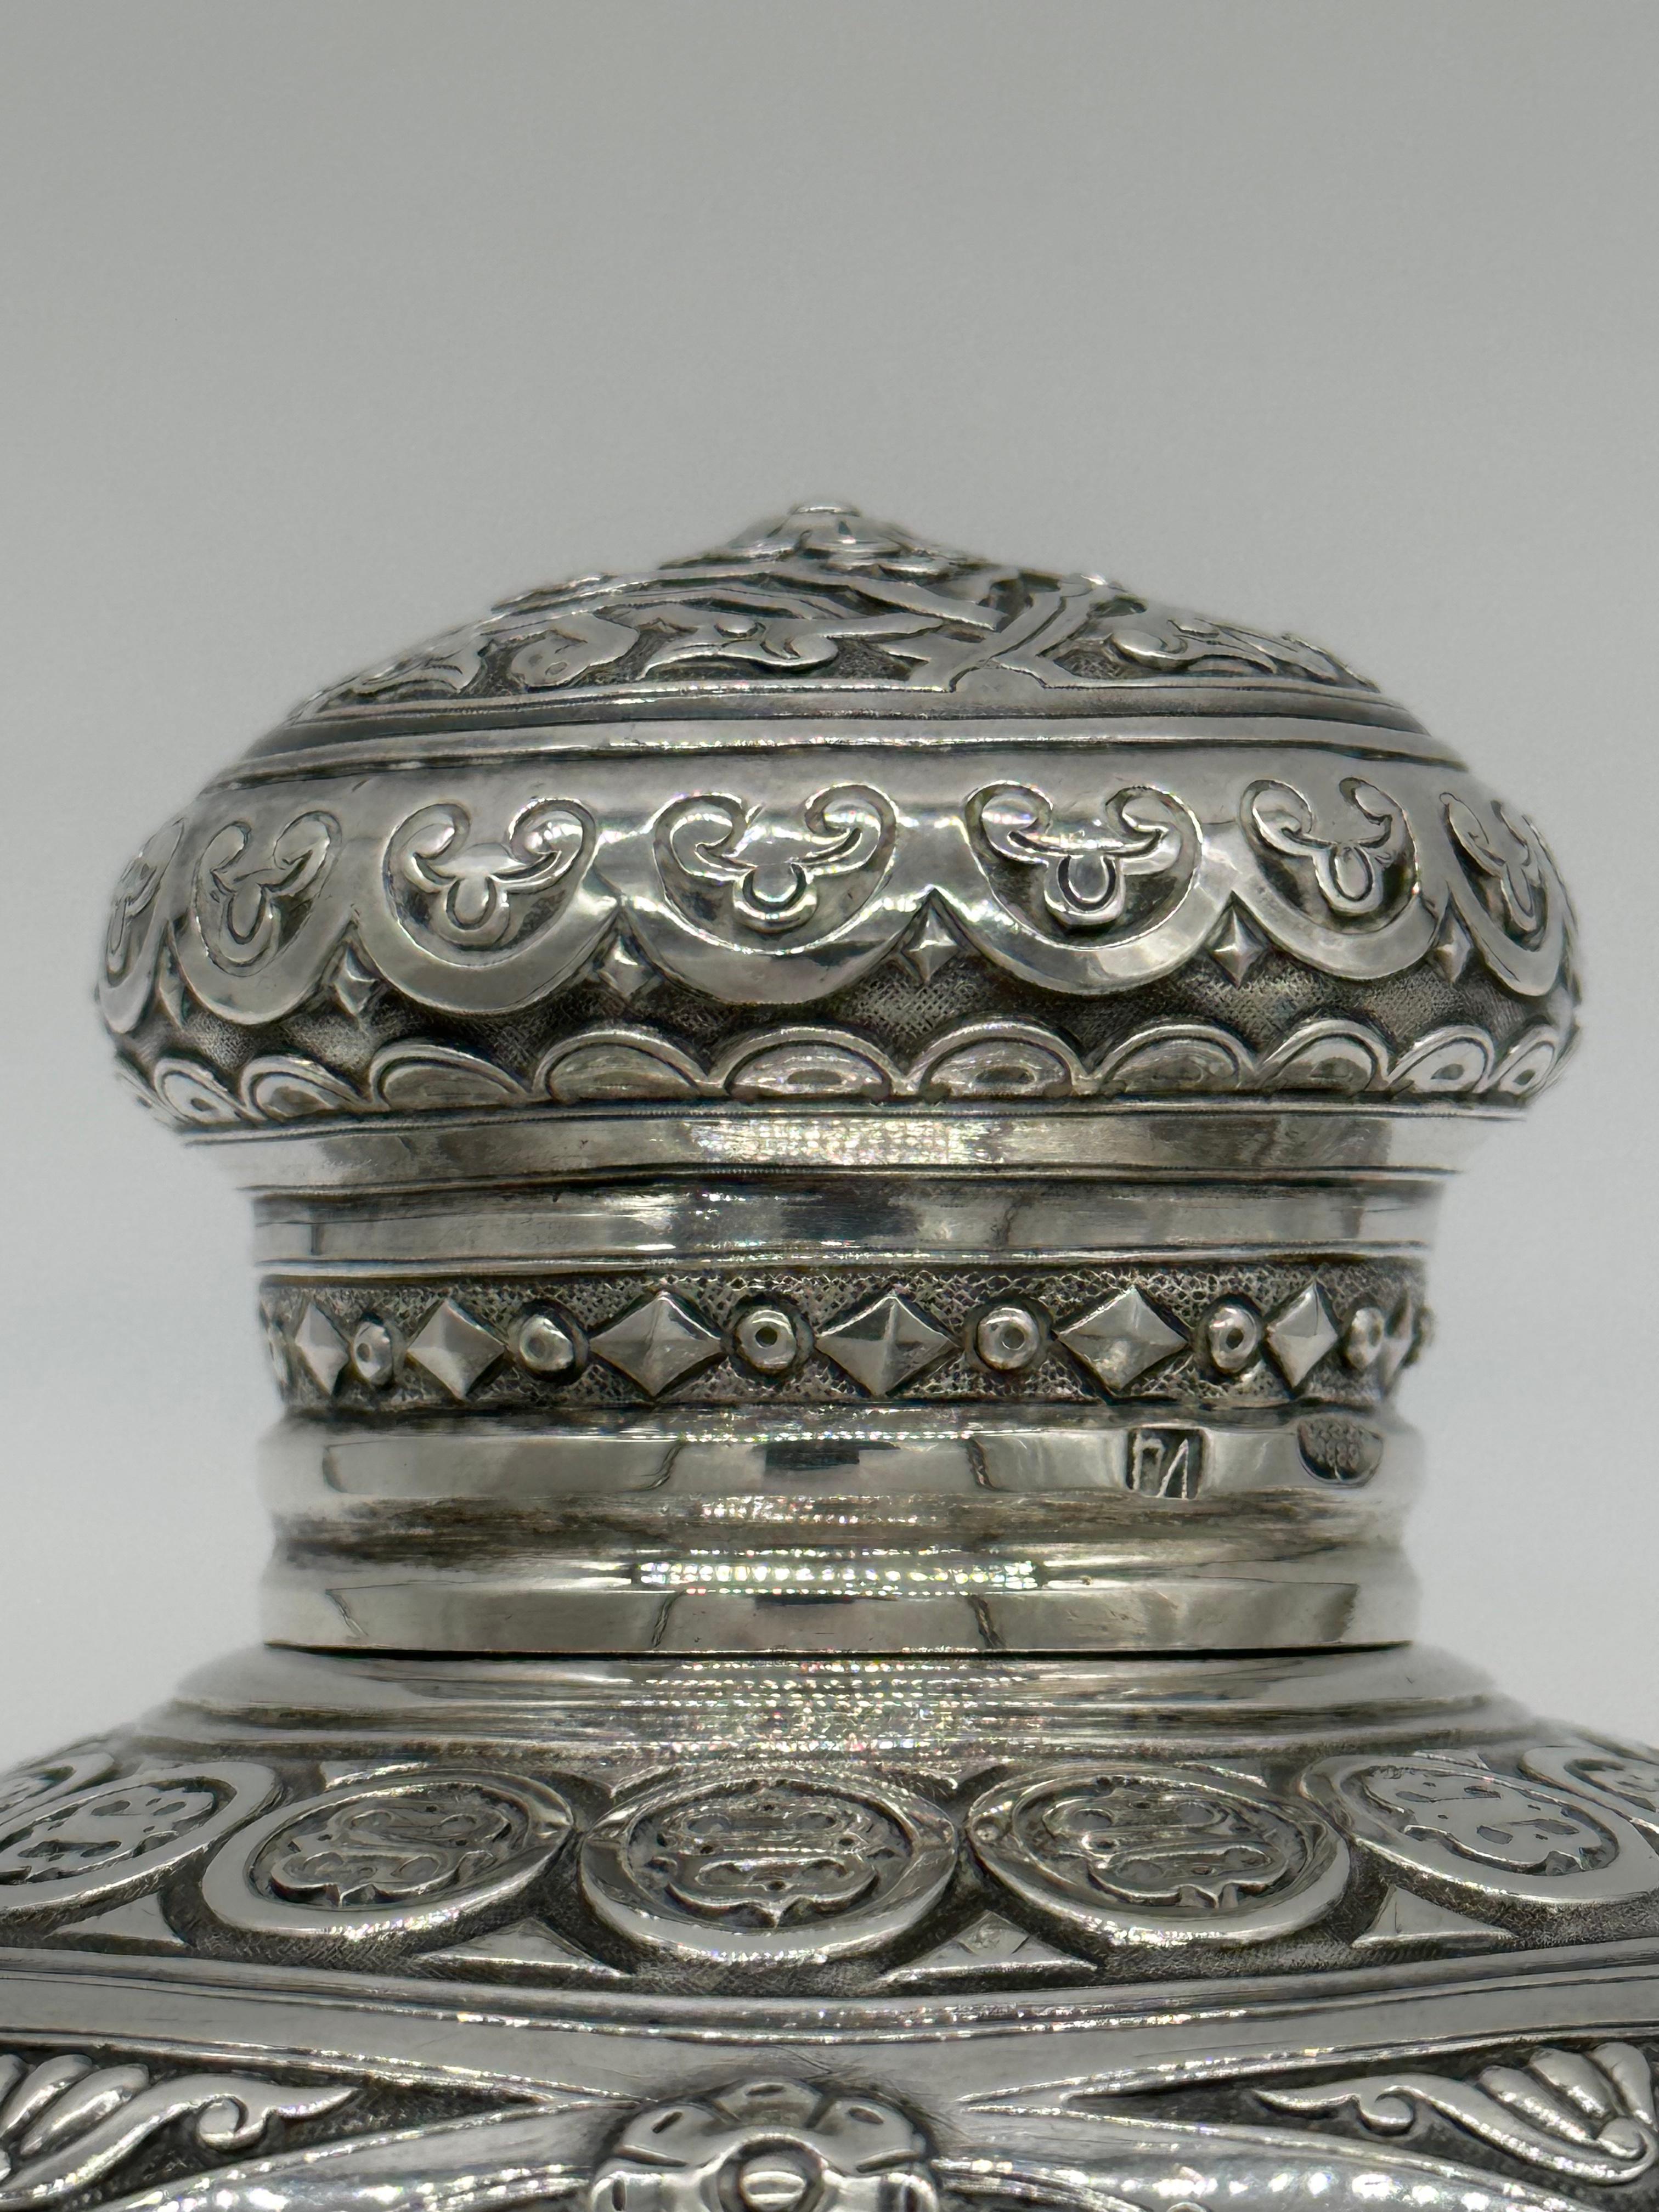 Amazing Antique Russian Imperial Silver Tea Caddy, Loskutov, Moscow 1889 7